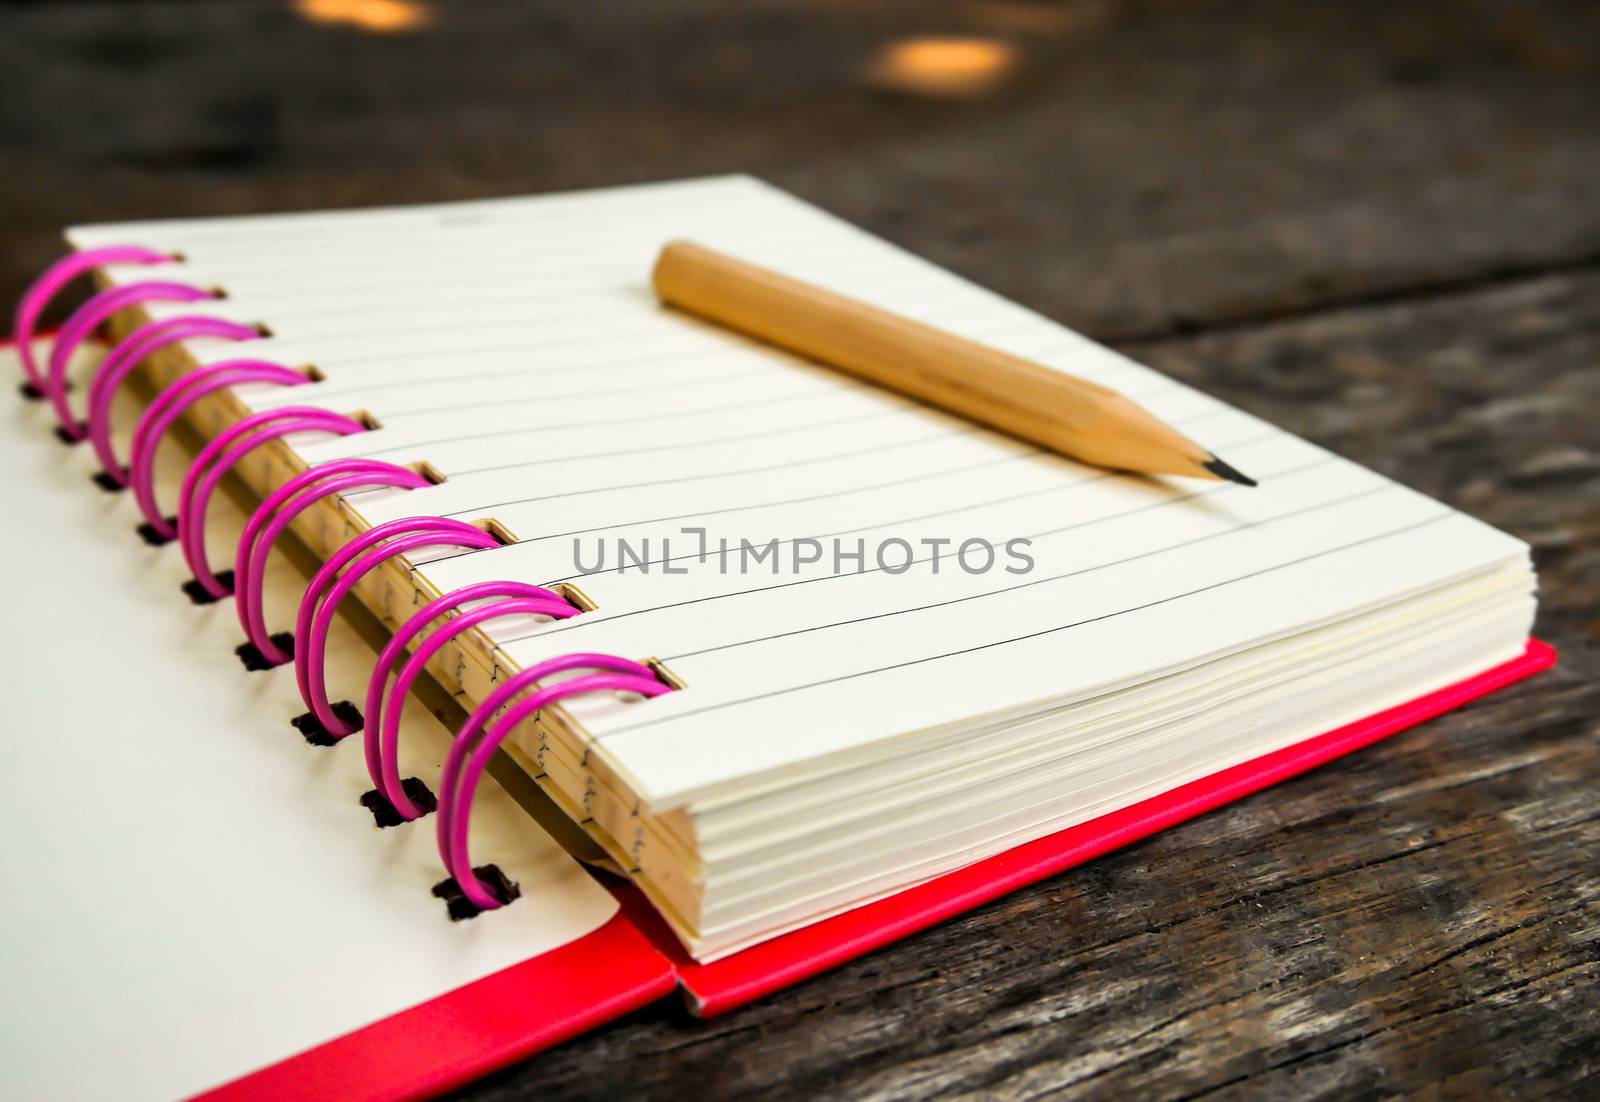 Focus note book with pencil on wooden table